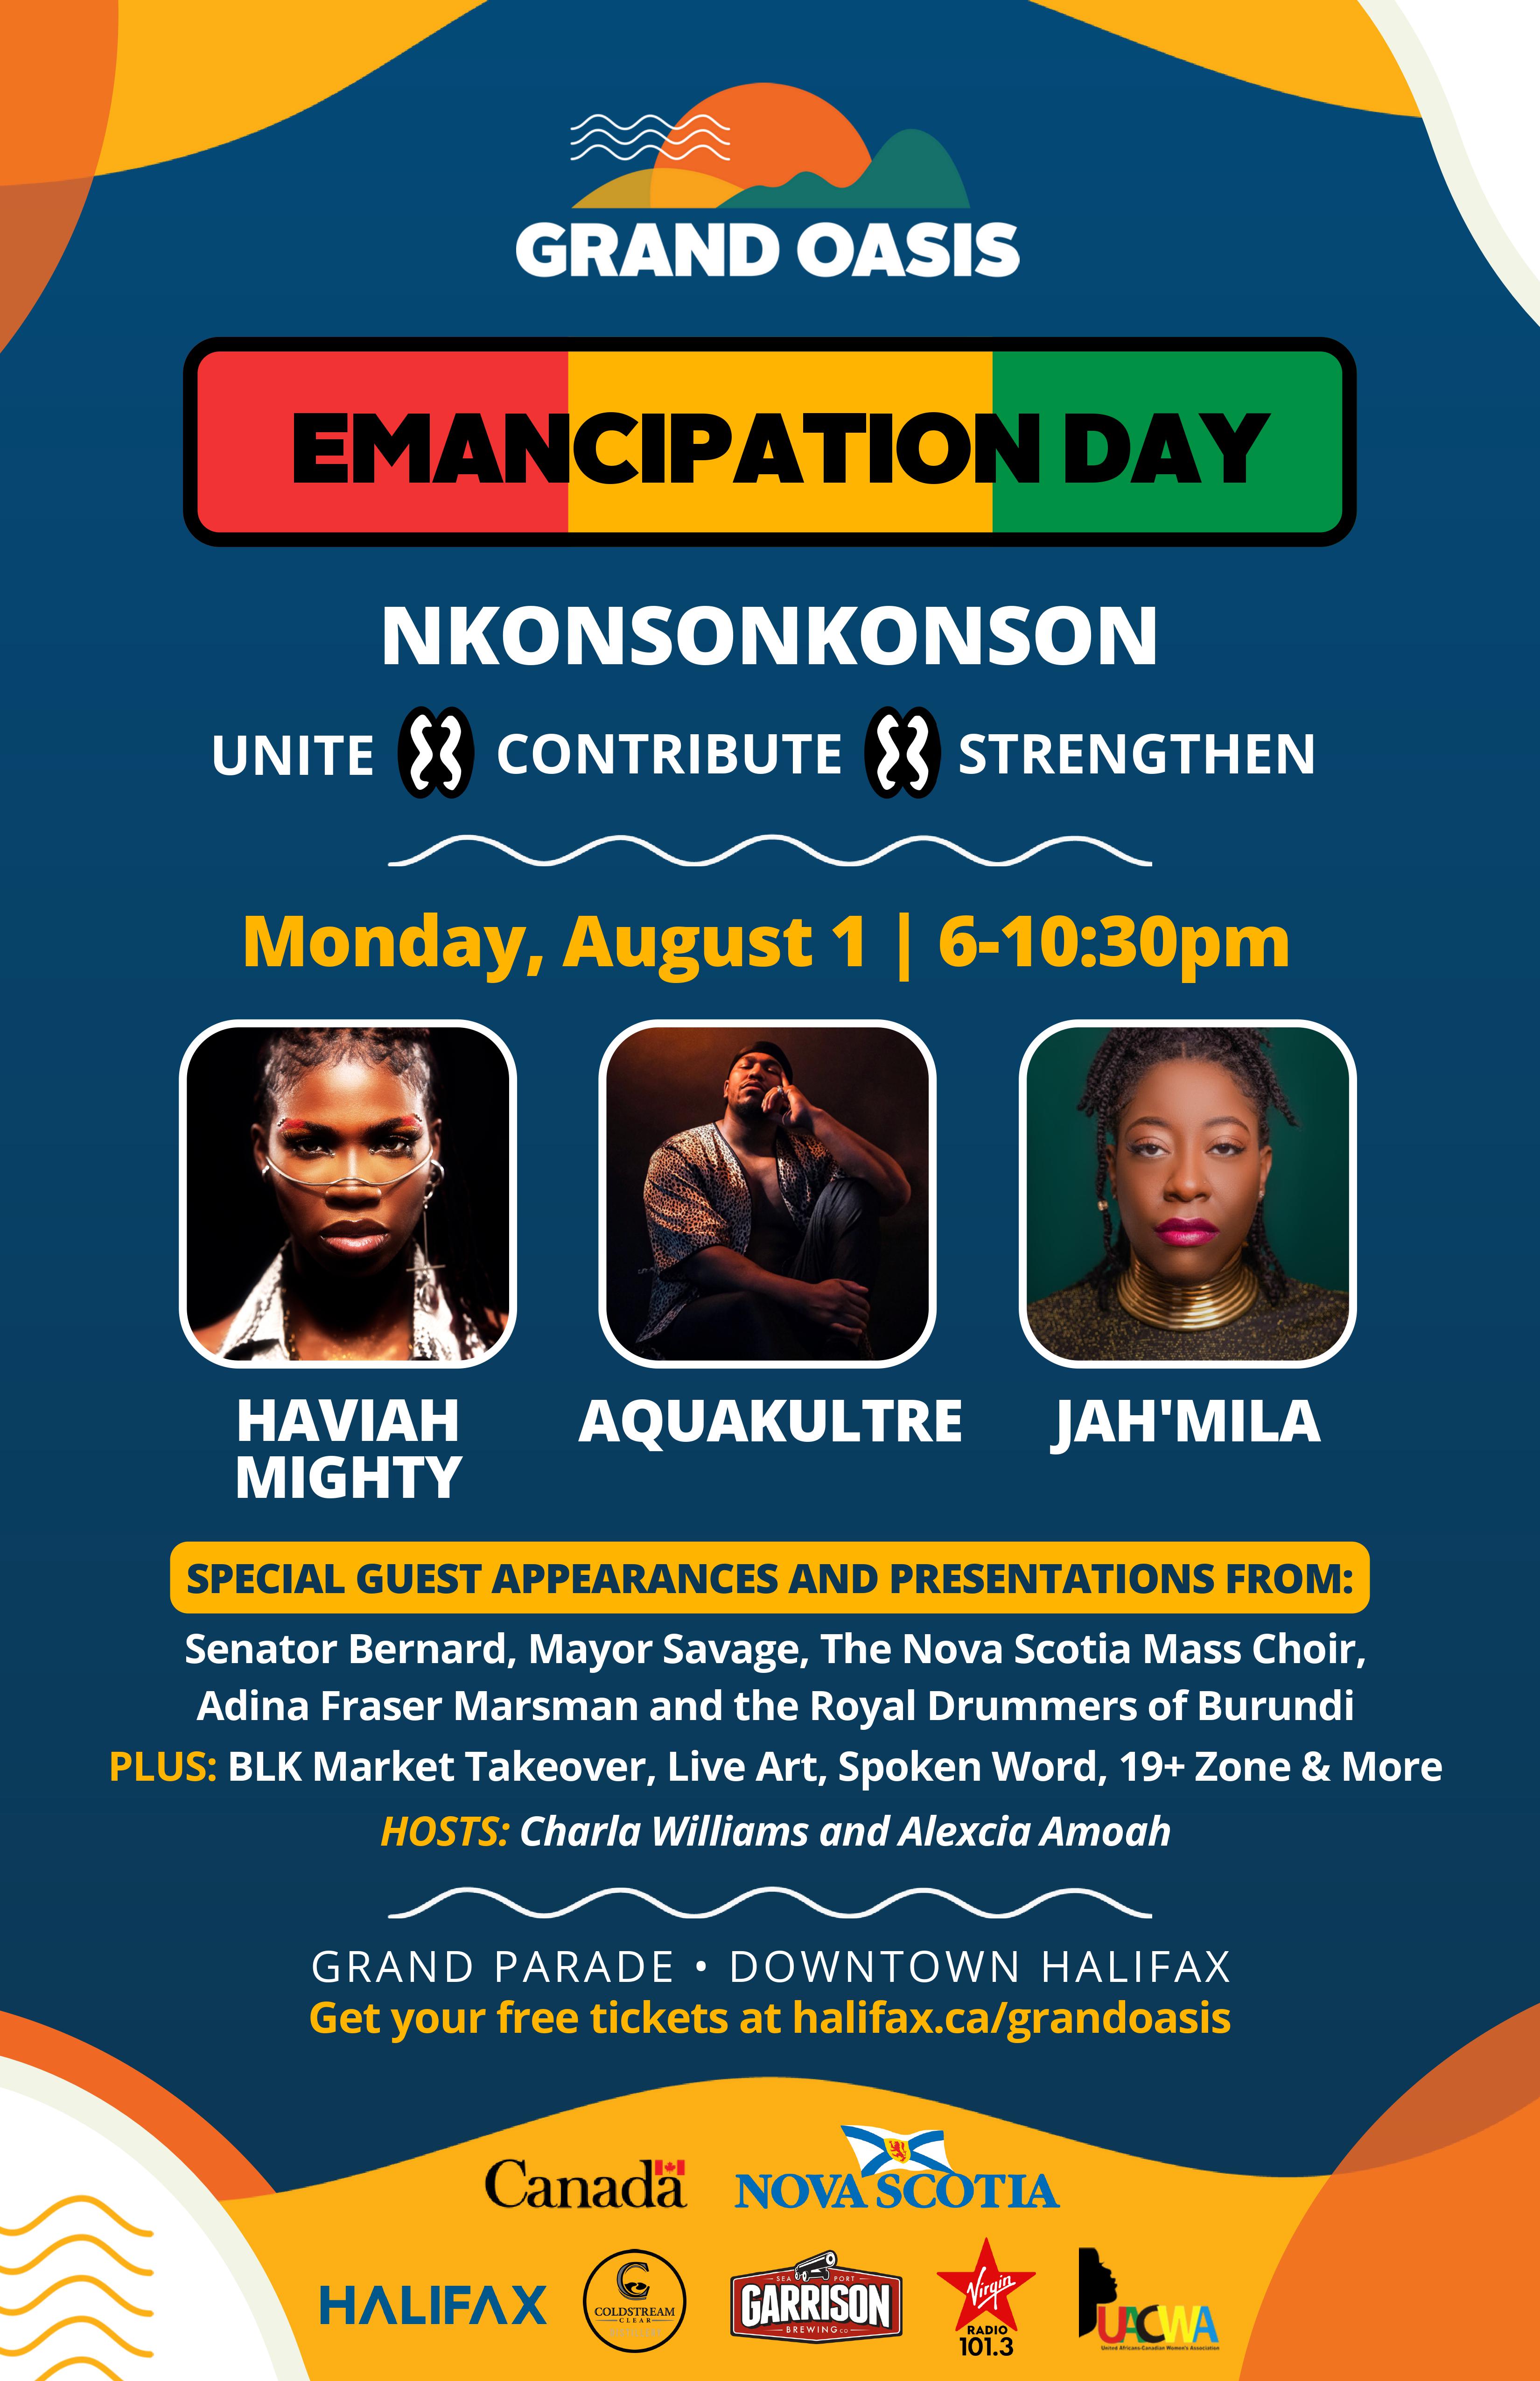 Promotional poster for Emancipation Day event